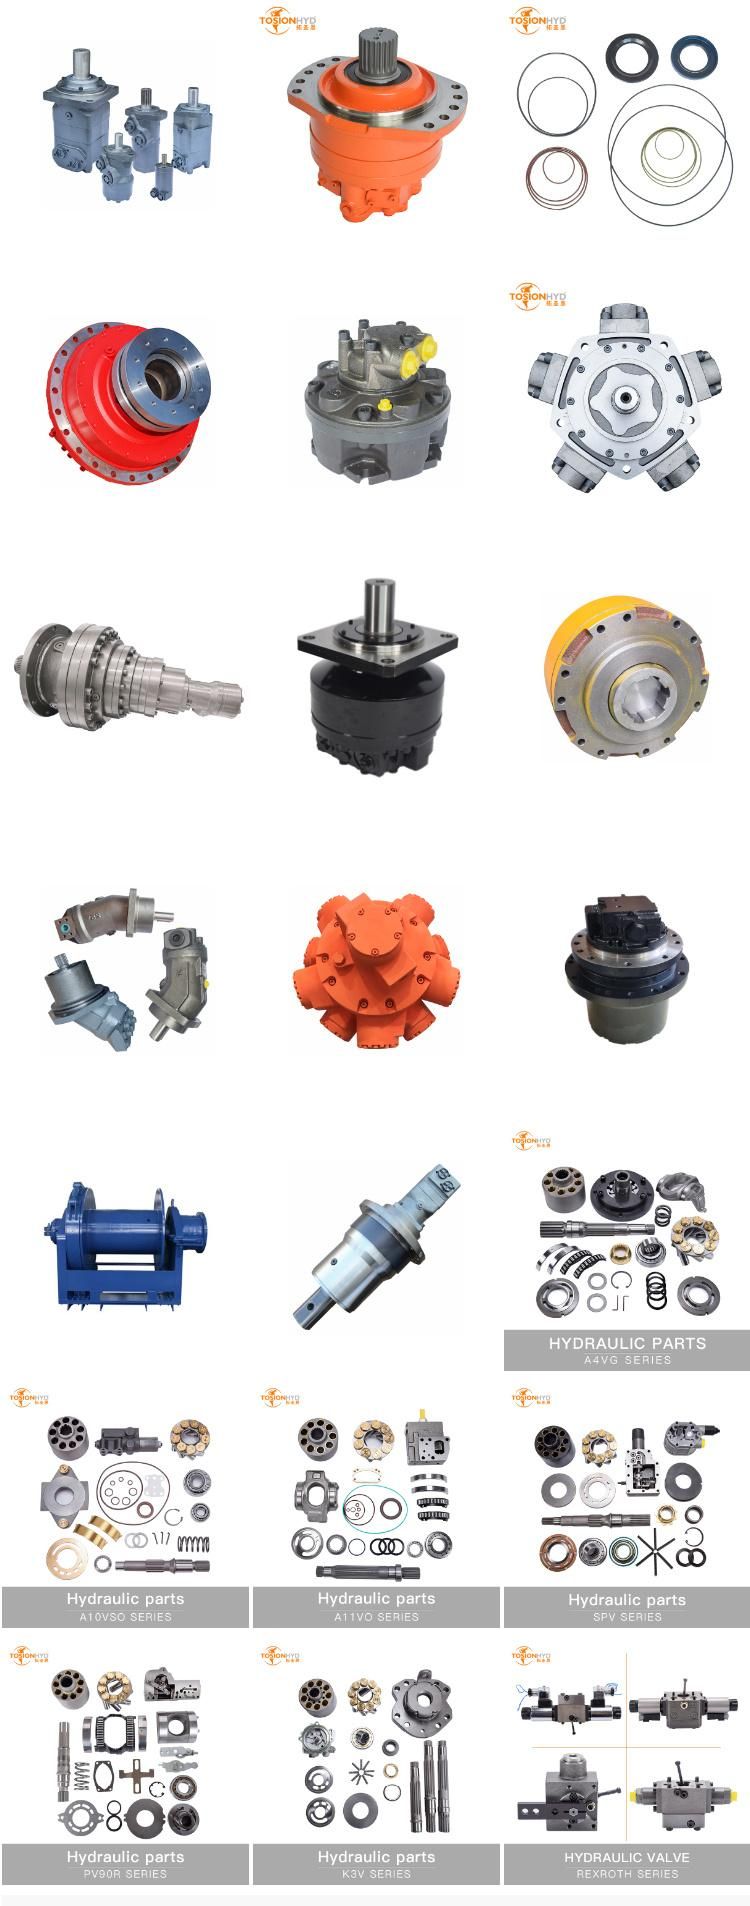 A2FM 32 Hydraulic Motor Parts with Rexroth Spare Repair Kits